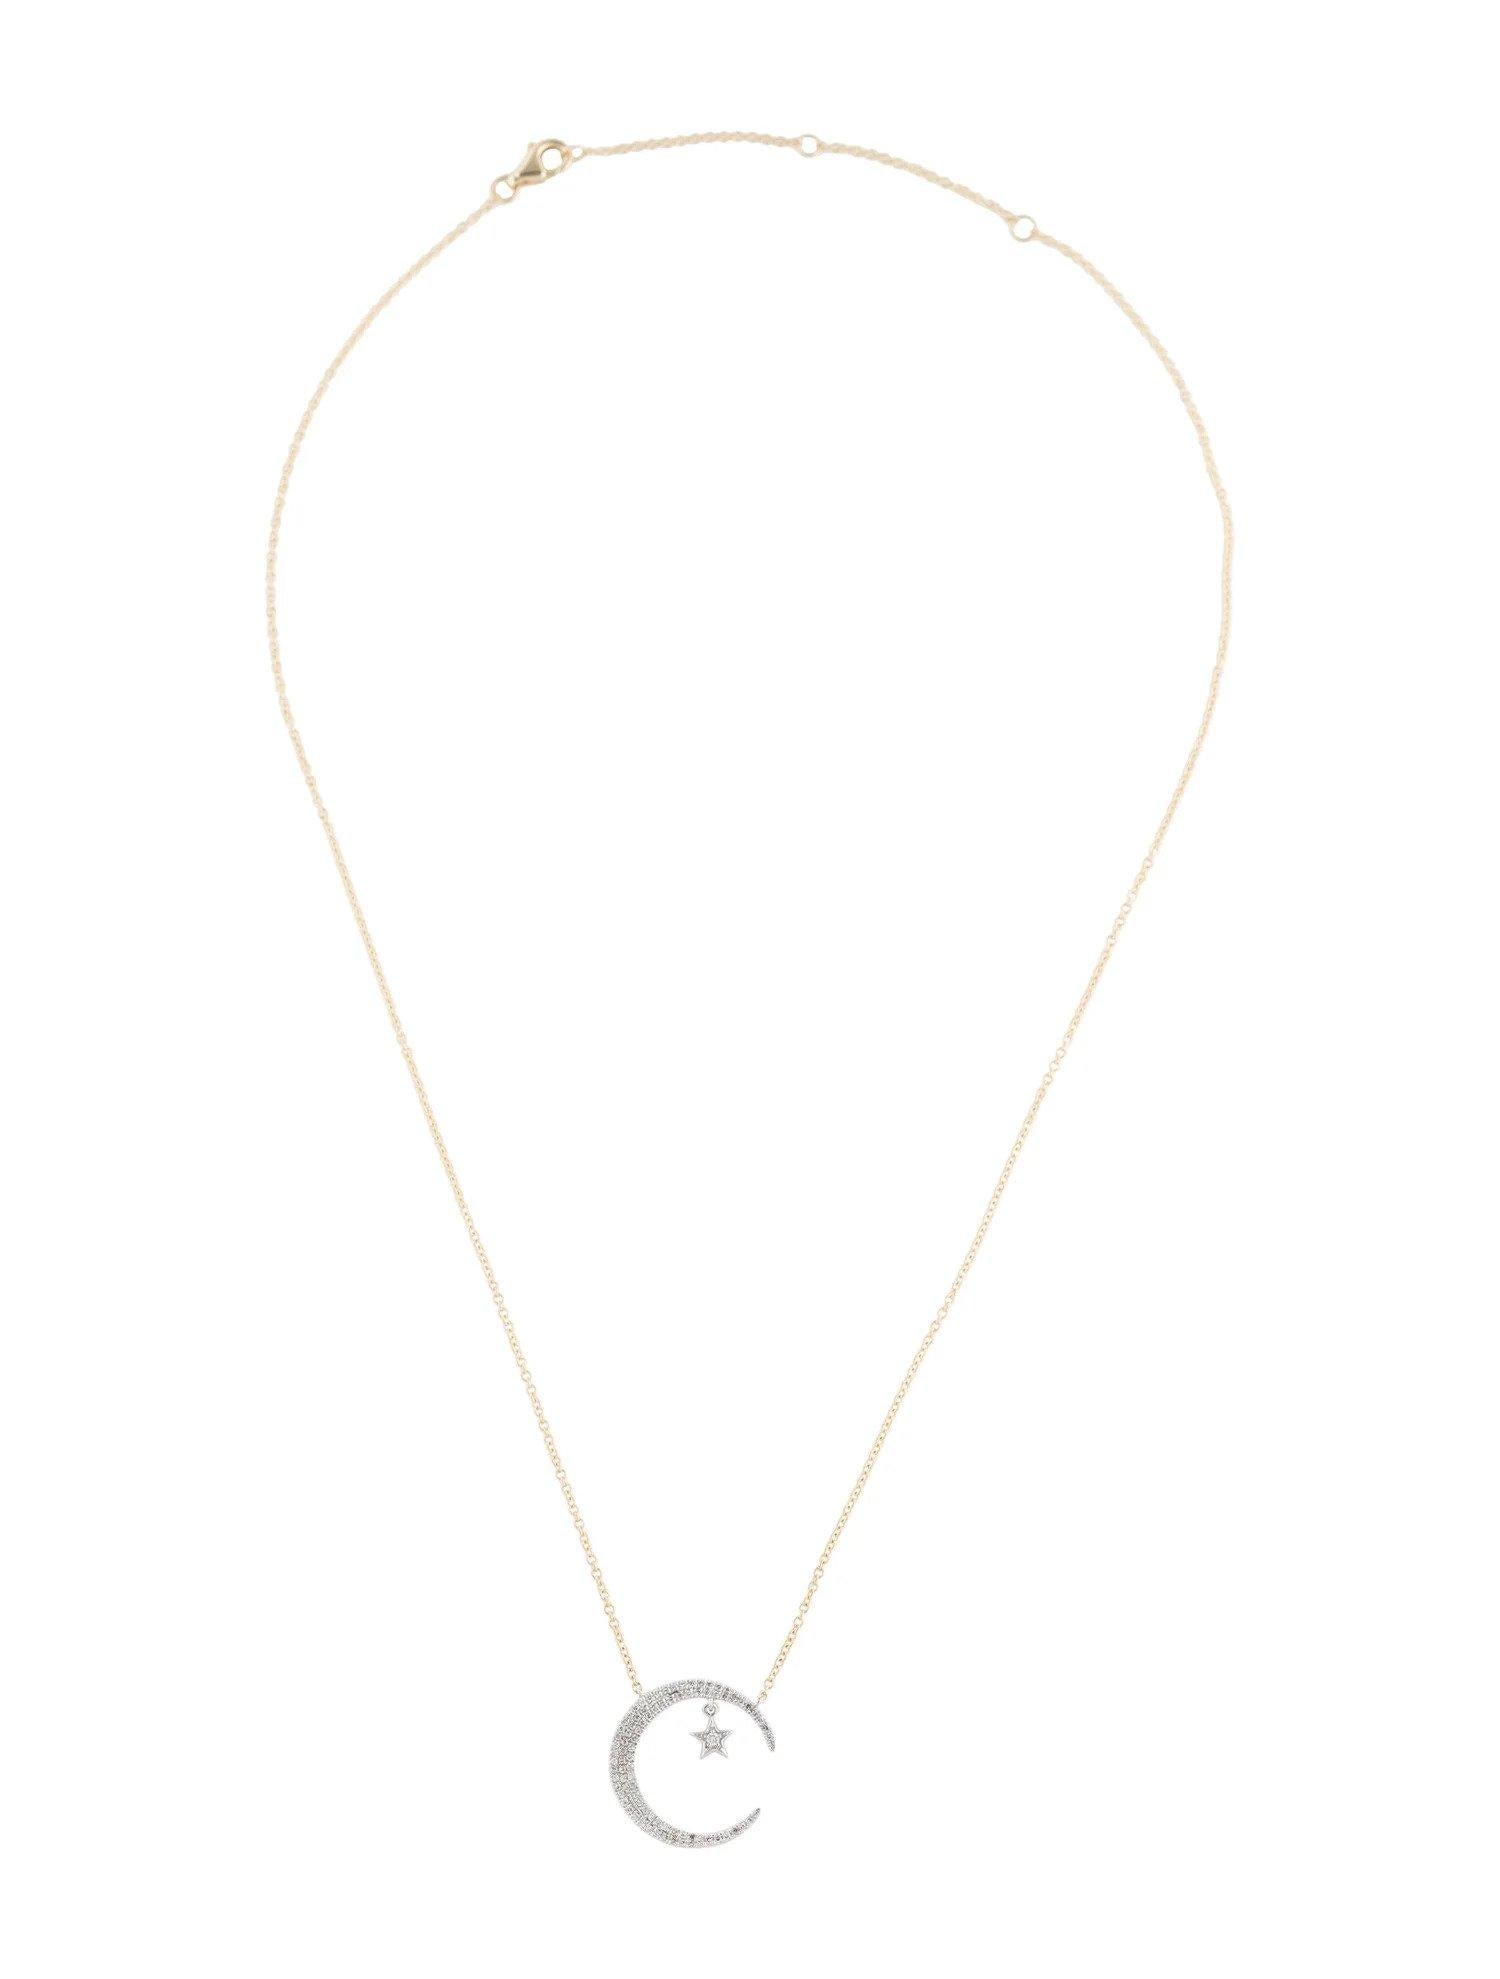 Women's or Men's 0.25 Carat Diamond Crescent Moon and Star White & Yellow Gold Pendant Necklace For Sale